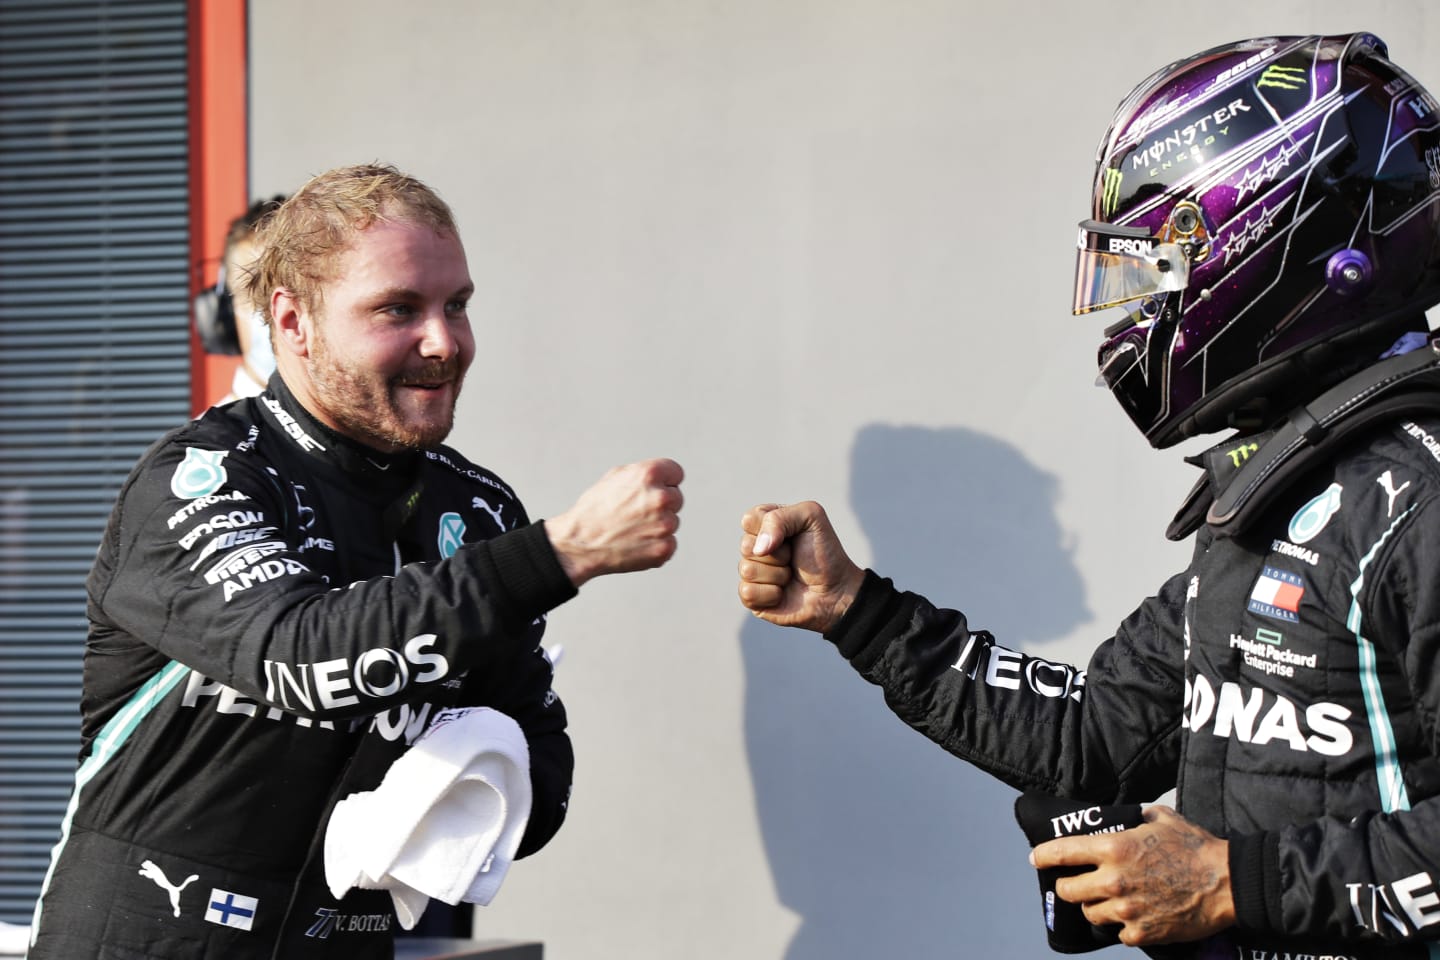 IMOLA, ITALY - OCTOBER 31: Pole position qualifier Valtteri Bottas of Finland and Mercedes GP bumps fists with second place qualifier Lewis Hamilton of Great Britain and Mercedes GP in parc ferme in parc ferme during qualifying ahead of the F1 Grand Prix of Emilia Romagna at Autodromo Enzo e Dino Ferrari on October 31, 2020 in Imola, Italy. (Photo by Luca Bruno - Pool/Getty Images)